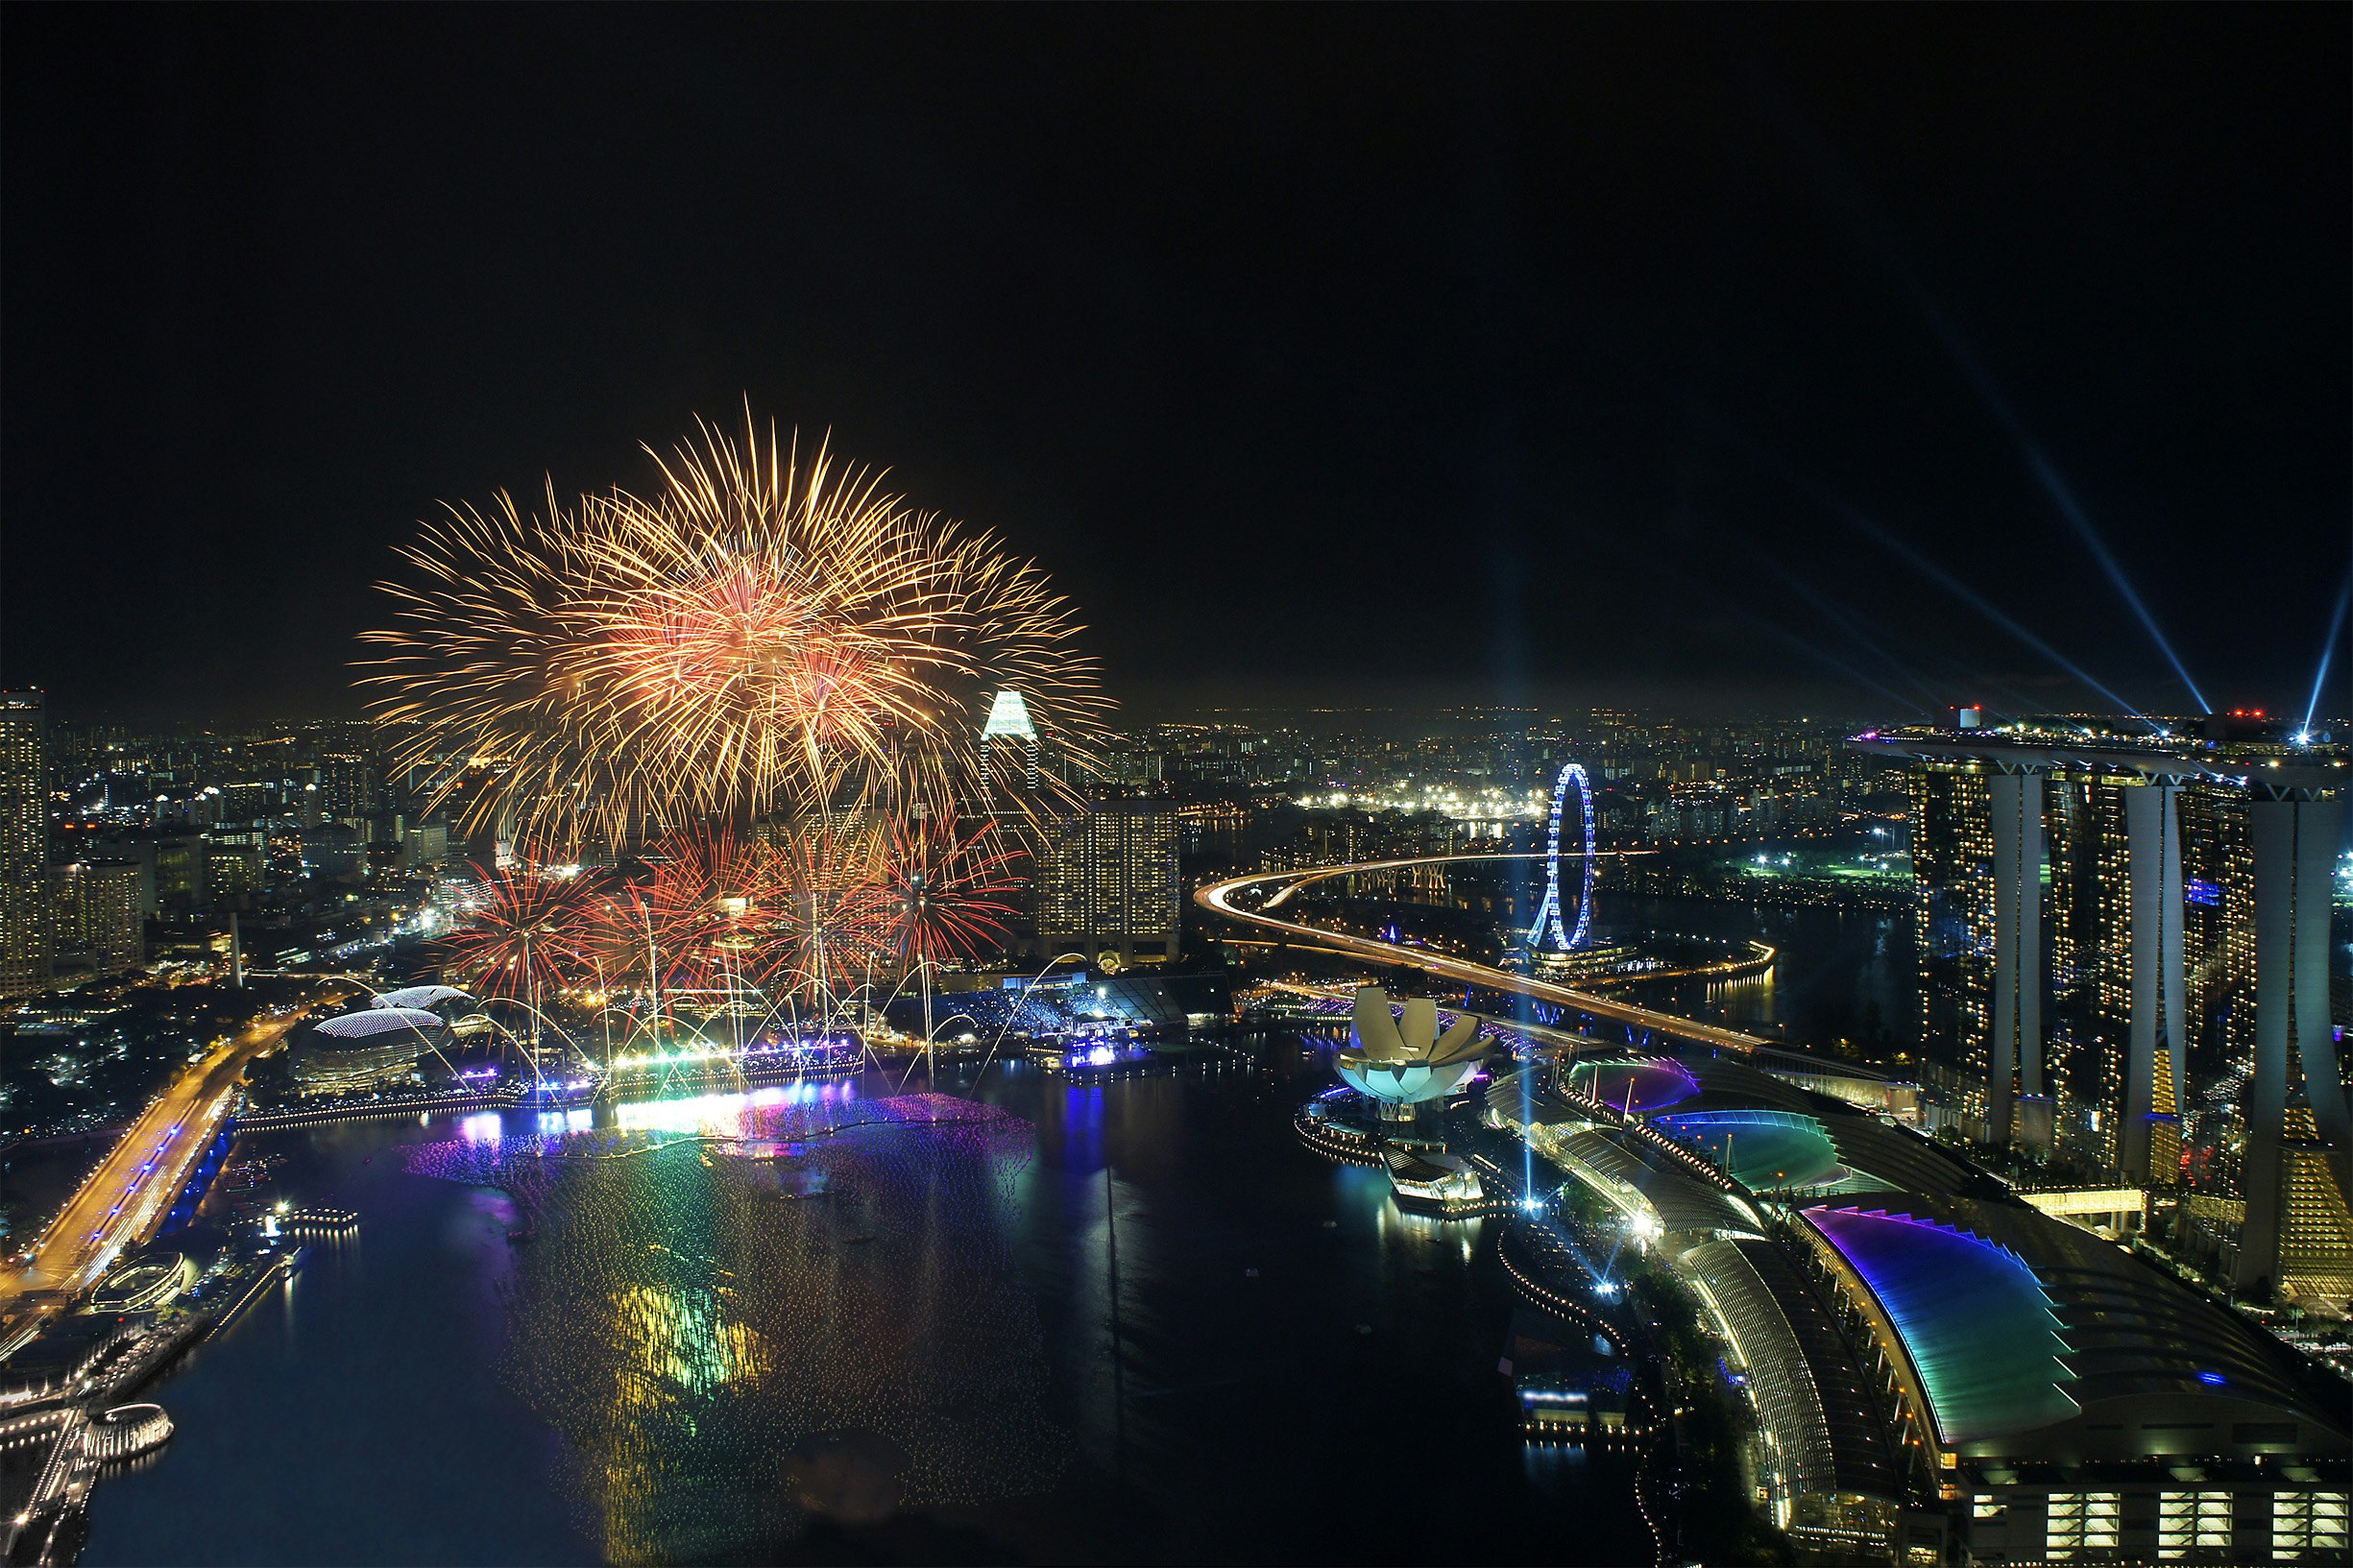 An aerial view of the Singapore NYE firework display. With a series of bright fireworks lighting up the sky above the city's skyscrapers. 